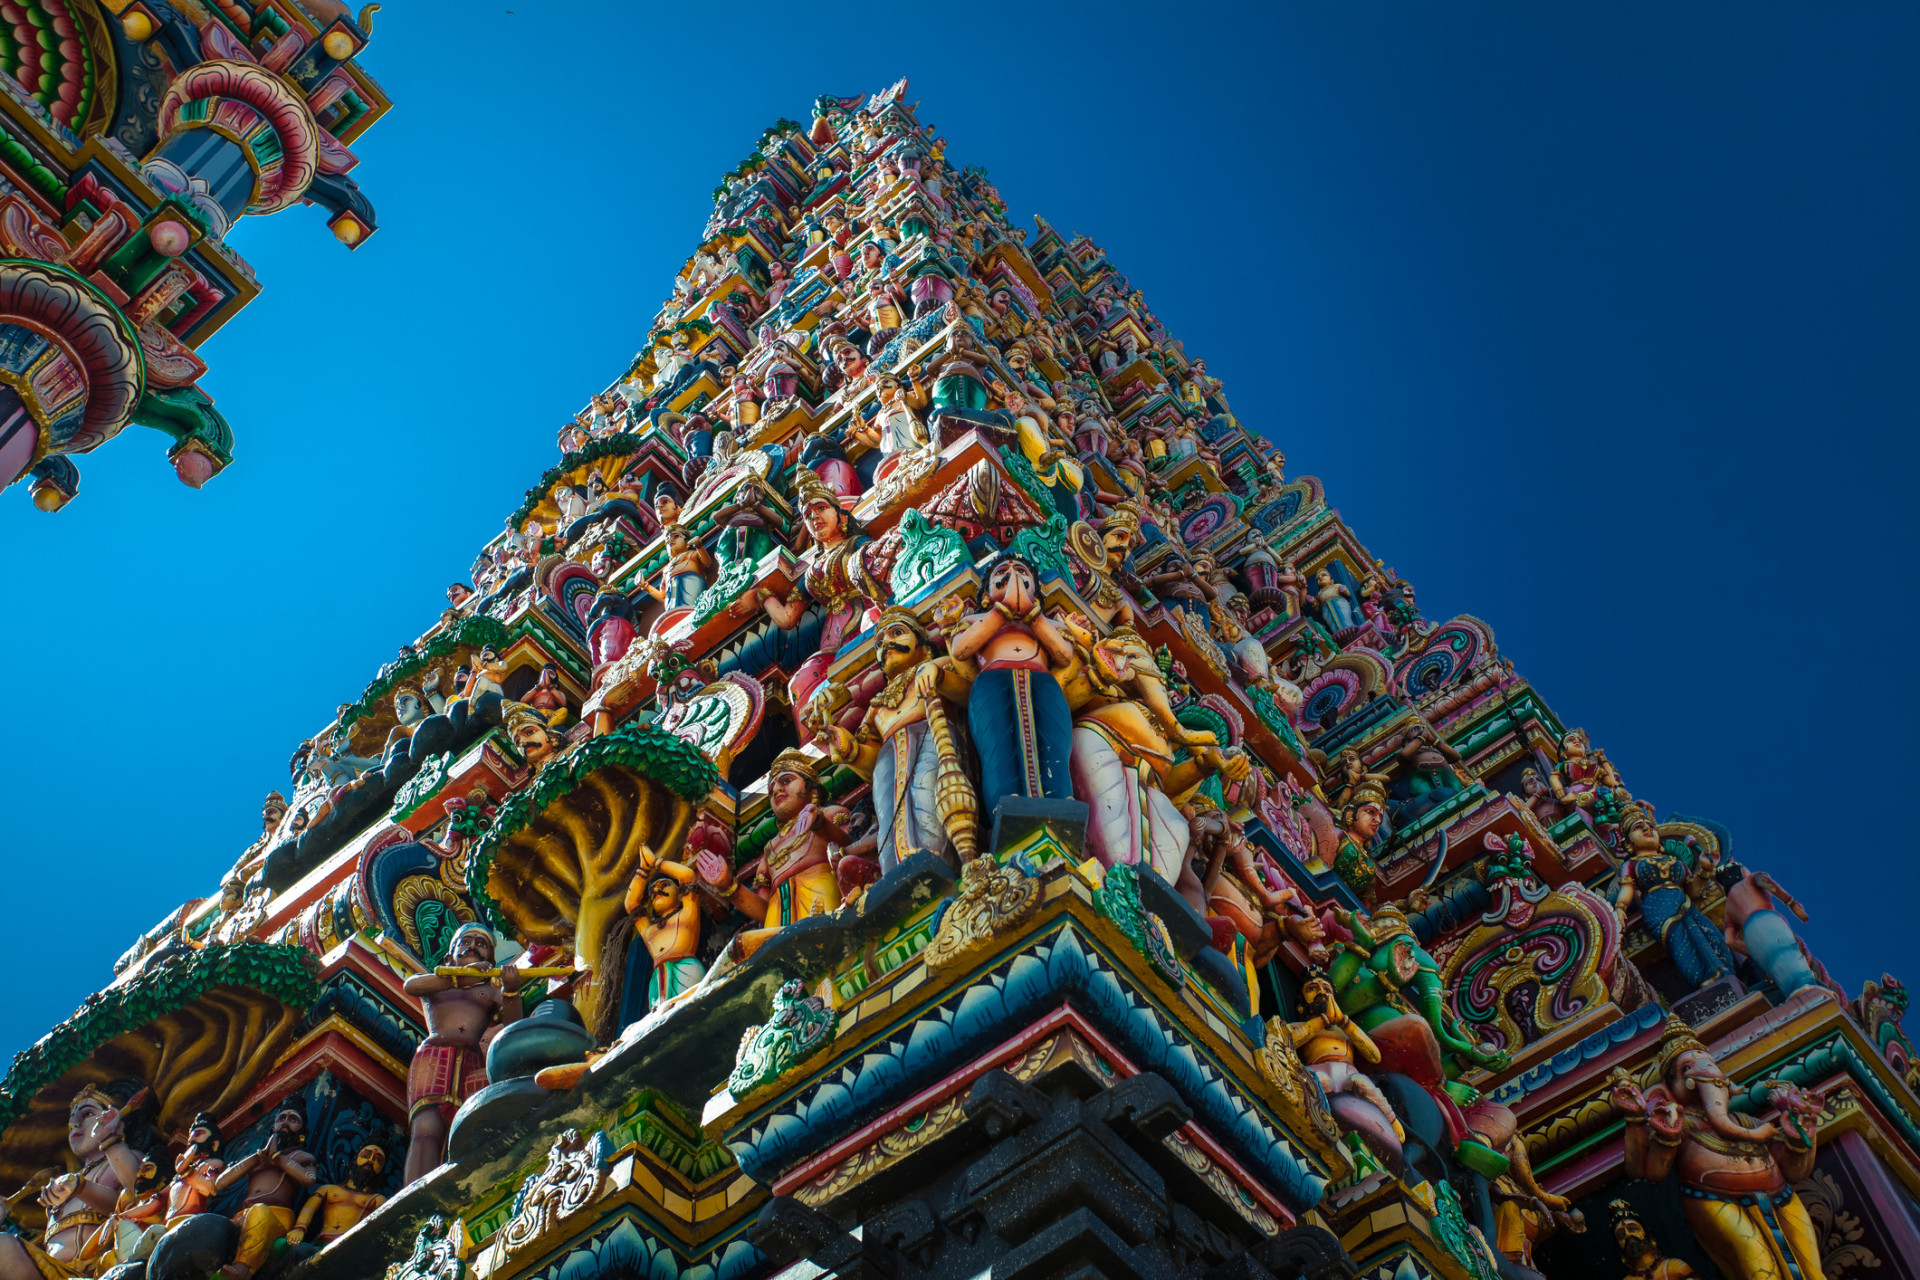 The New Kathiresan Temple in Colombo is distinguished by a colorful and highly ornate Gopuram, or monumental gatehouse tower.<p><a href="https://www.msn.com/en-us/community/channel/vid-7xx8mnucu55yw63we9va2gwr7uihbxwc68fxqp25x6tg4ftibpra?cvid=94631541bc0f4f89bfd59158d696ad7e">Follow us and access great exclusive content every day</a></p>